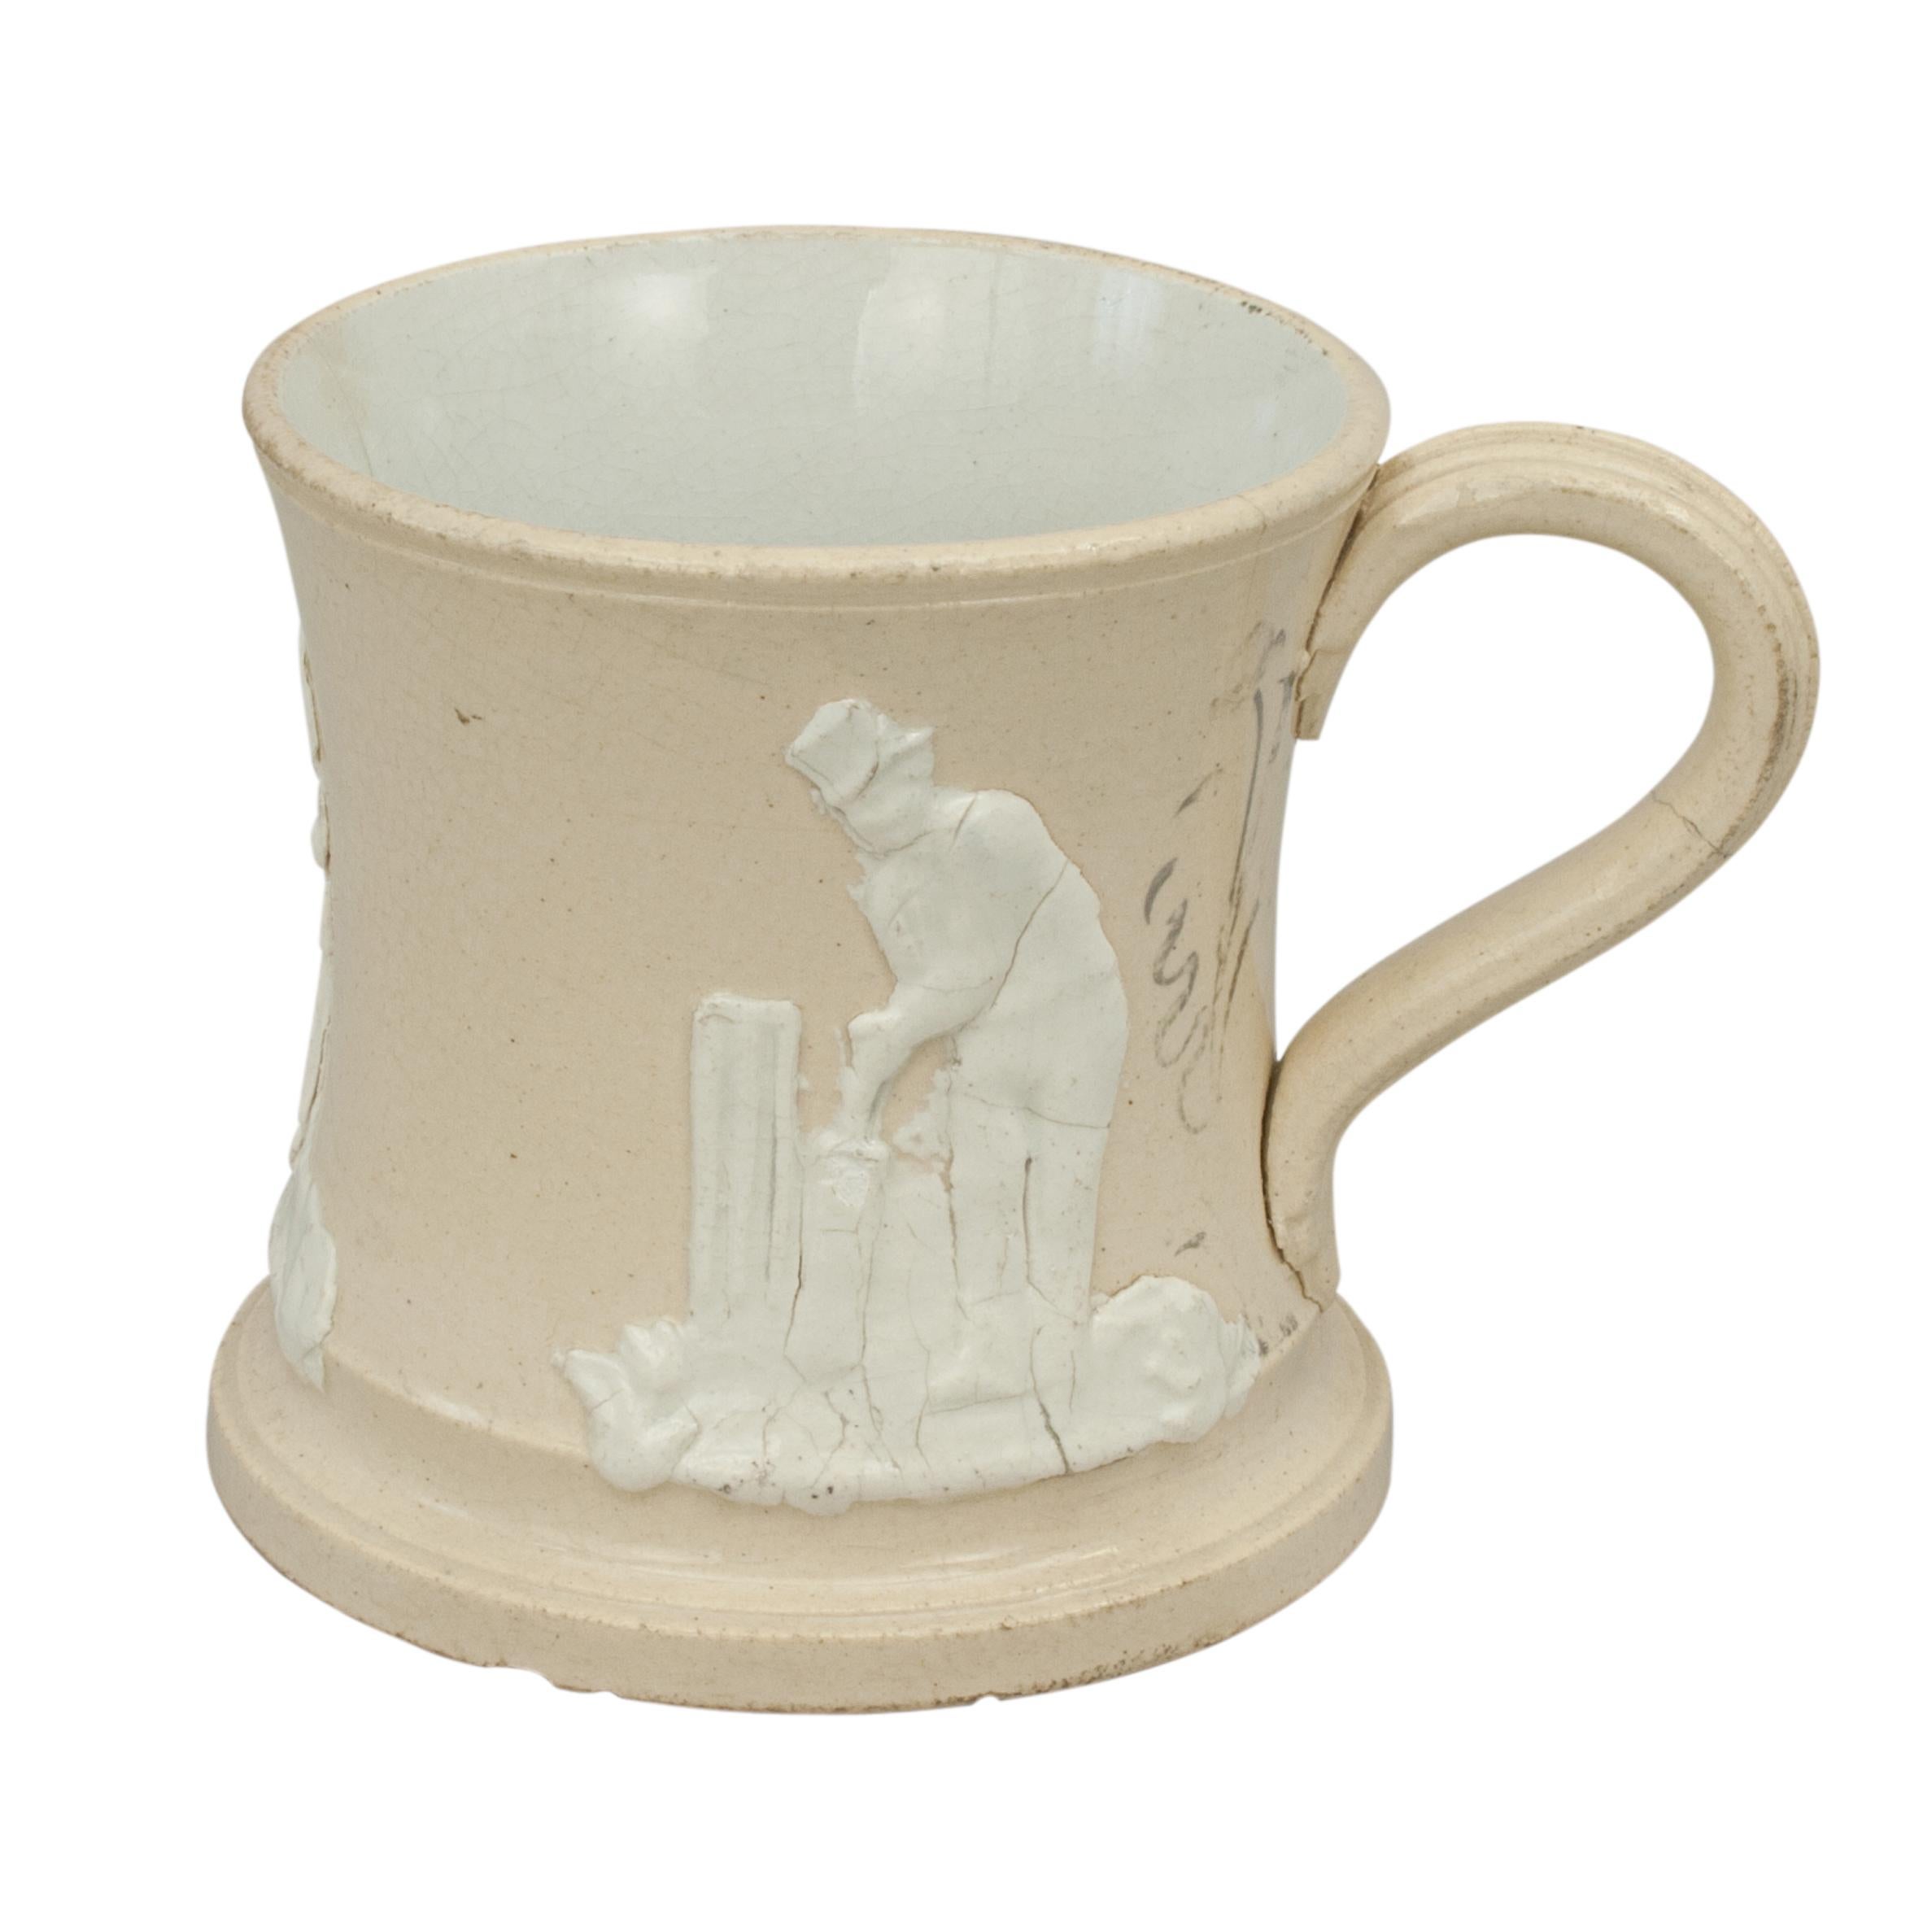 Staffordshire Cricket Mug.
An early Staffordshire Cricket mug, the body in cream colour with three cricketers in white relief around the mug. The three cricketers are all dressed in period costumes, a Batsman, a Bowler and a Wicket Keeper. A nice